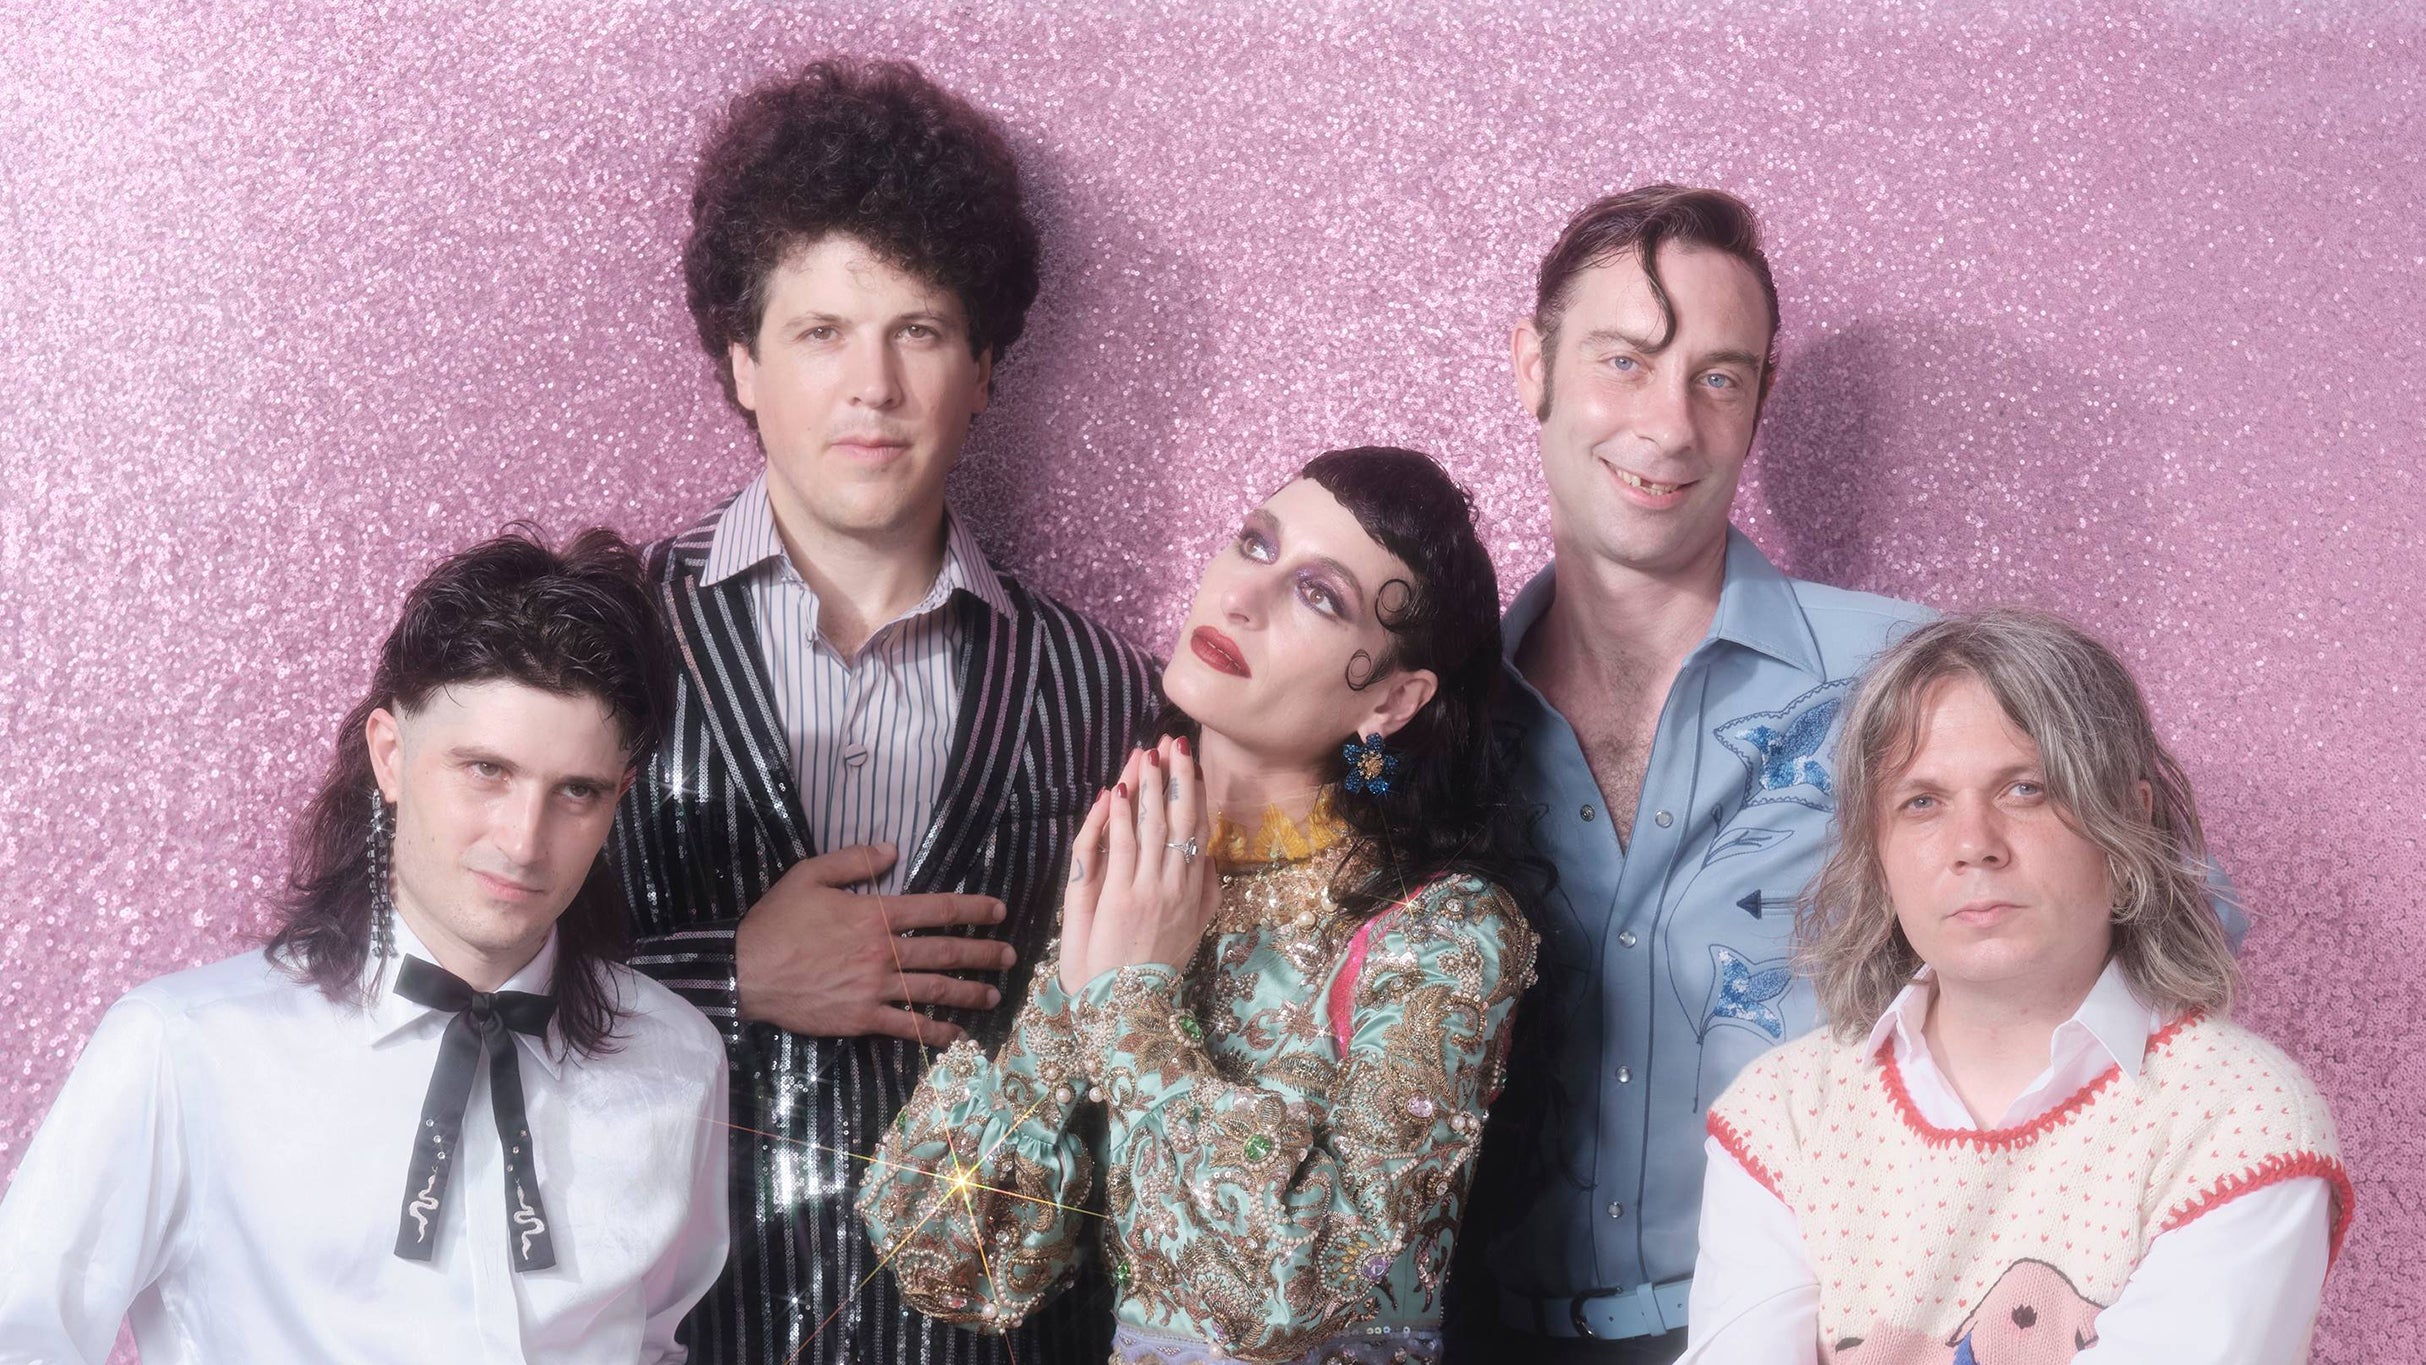 Ticket Reselling CHIRP Radio Welcomes Black Lips / National Photo Committee (Late Show)